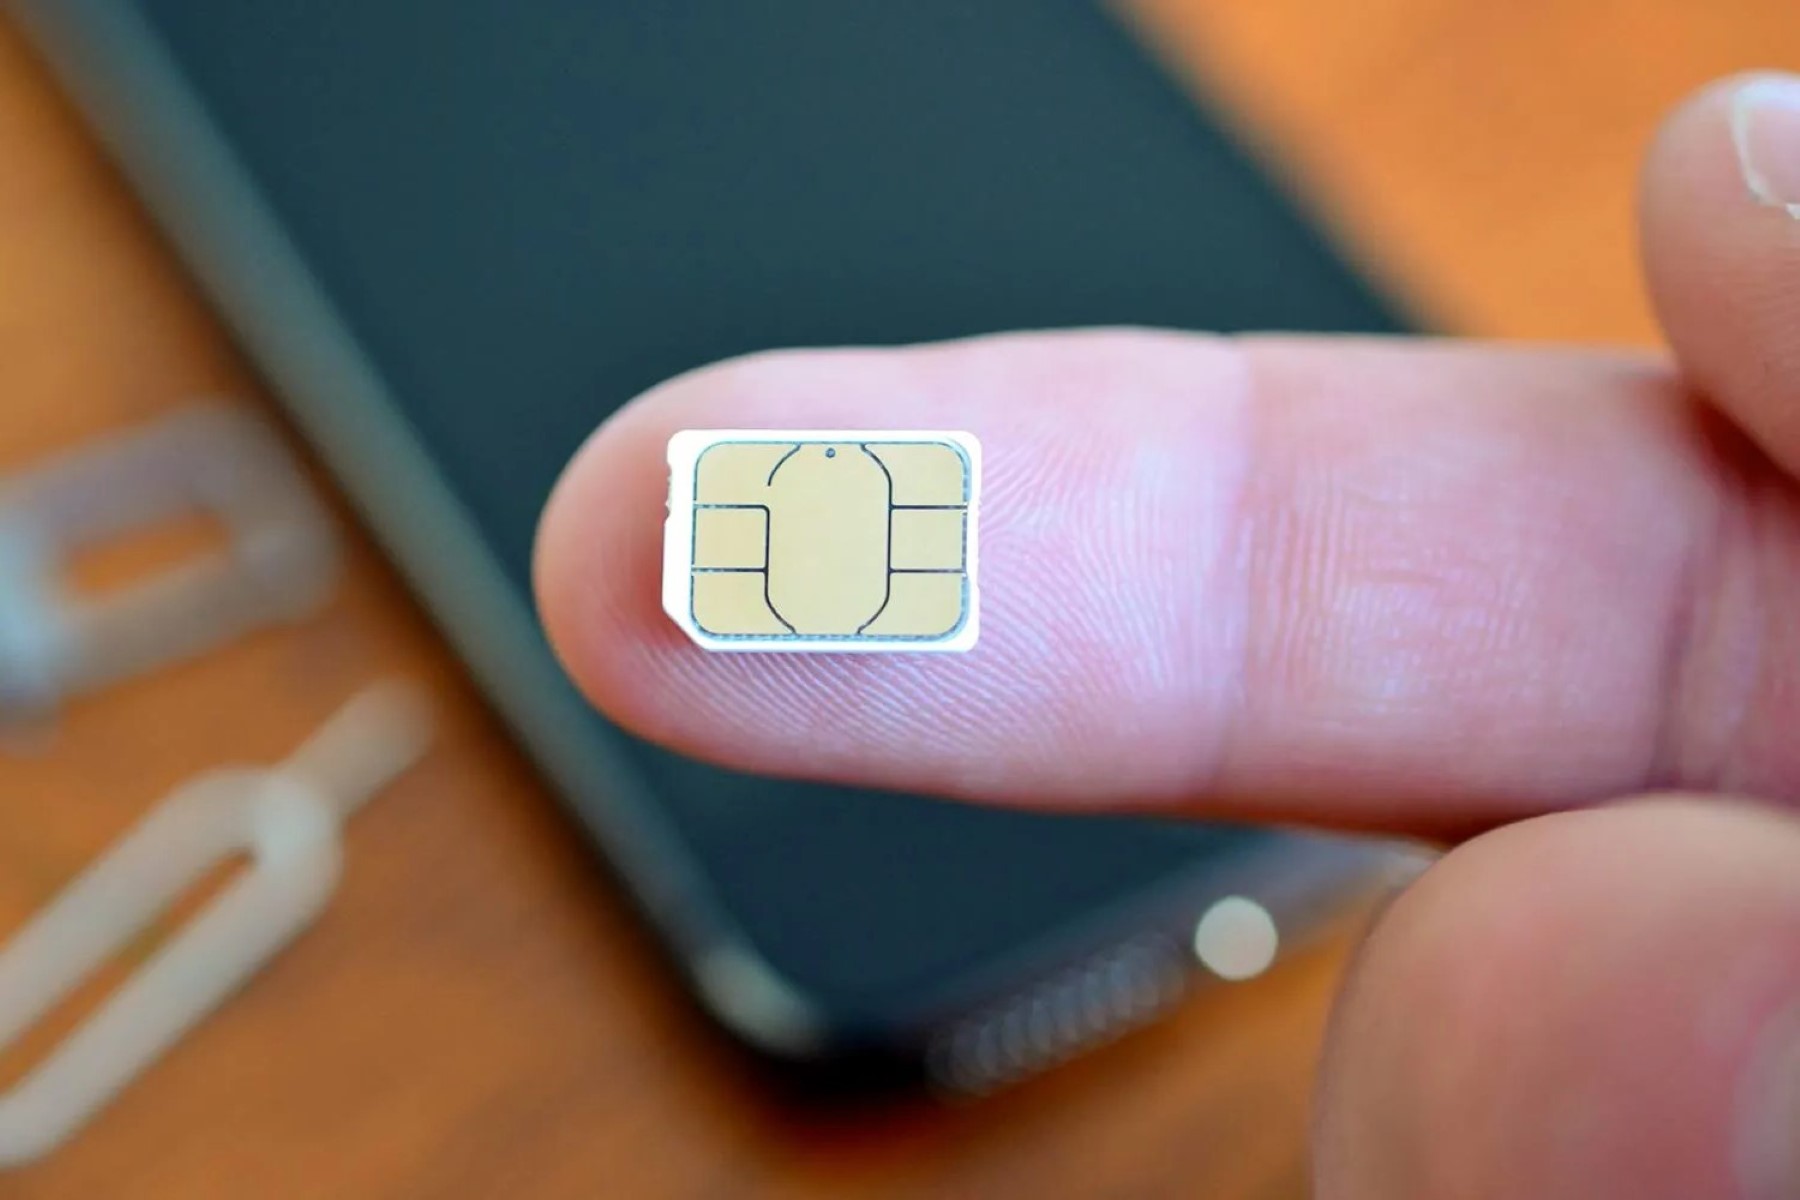 SIM Sizing: Identifying The SIM Card Size For IPhone 10